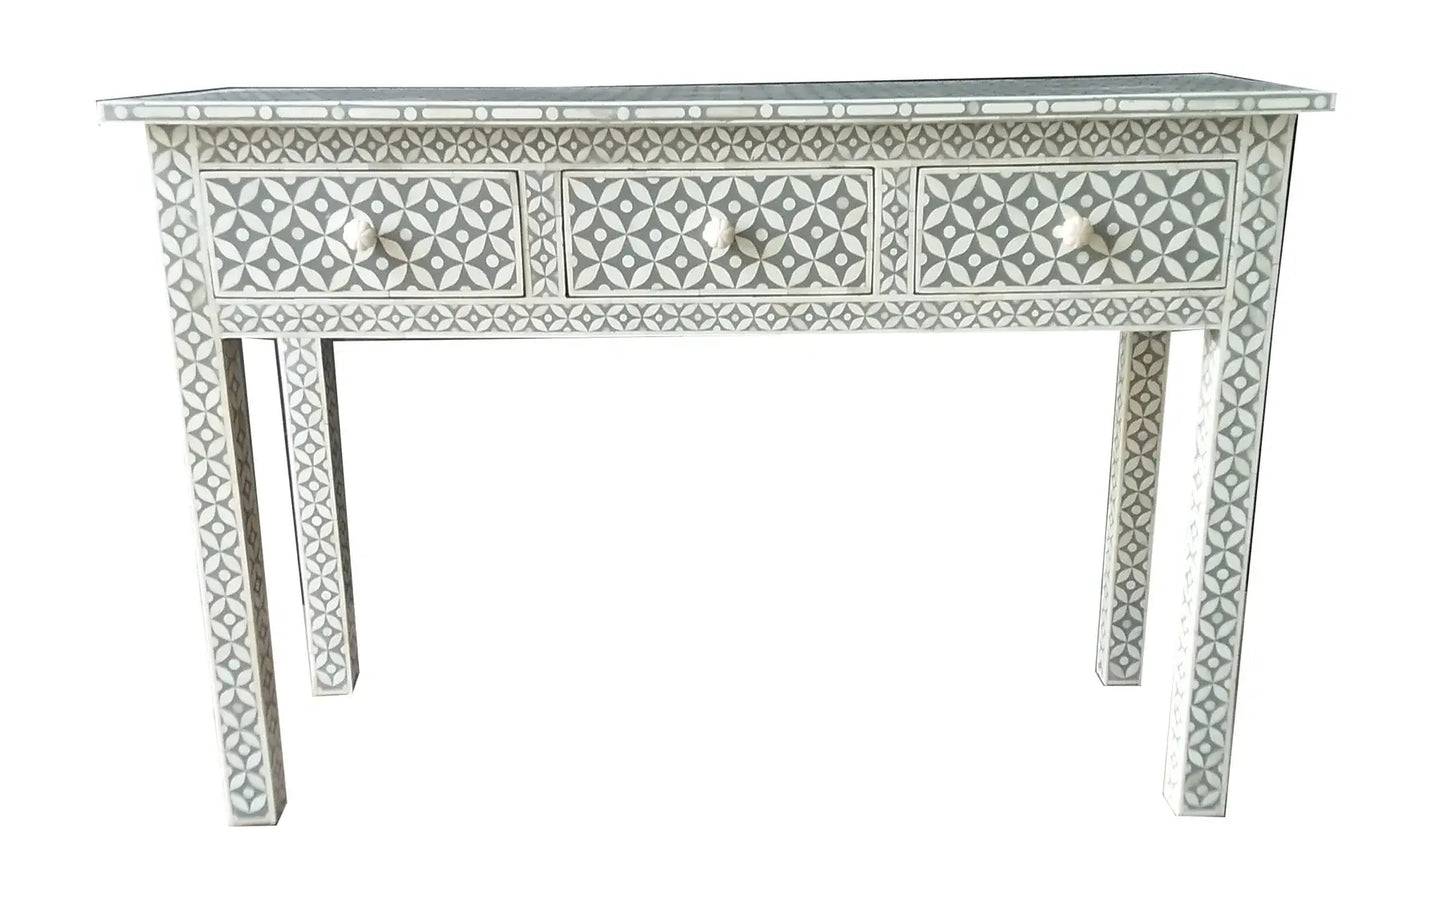 Handmade Grey Mother of Pearl Star Eye pattern Antique Handmade Vintage console table for living room